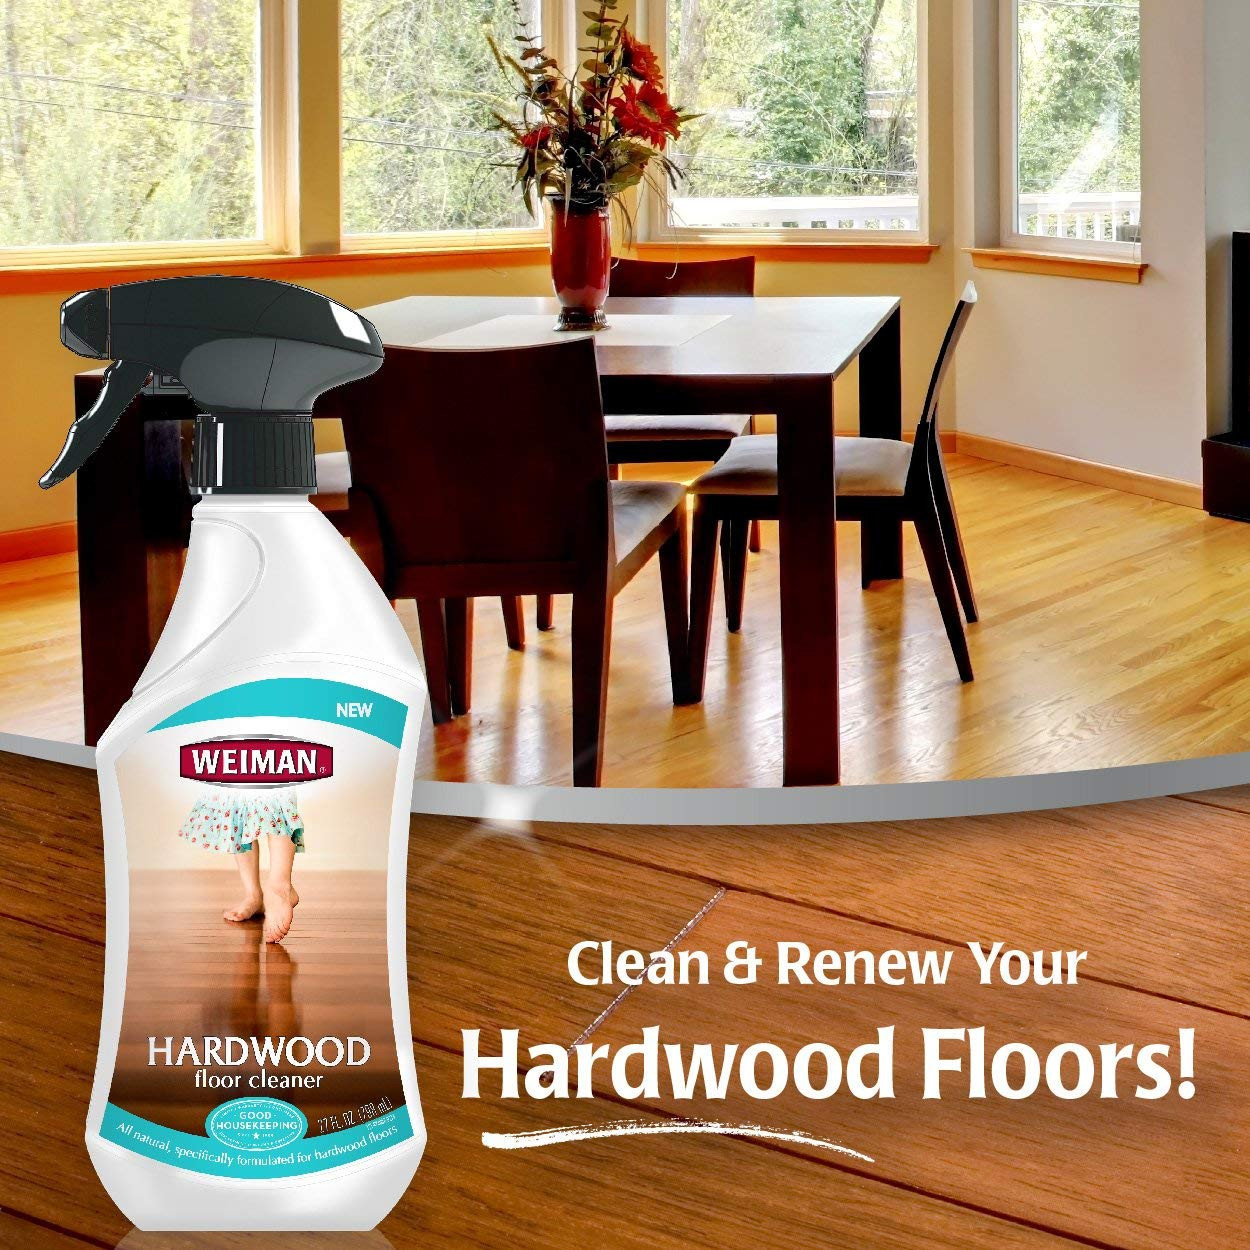 bona hardwood floor cleaner on laminate of amazon com weiman hardwood floor cleaner surface safe no harsh throughout amazon com weiman hardwood floor cleaner surface safe no harsh scent safe for use around kids and pets residue free 27 oz trigger home kitchen